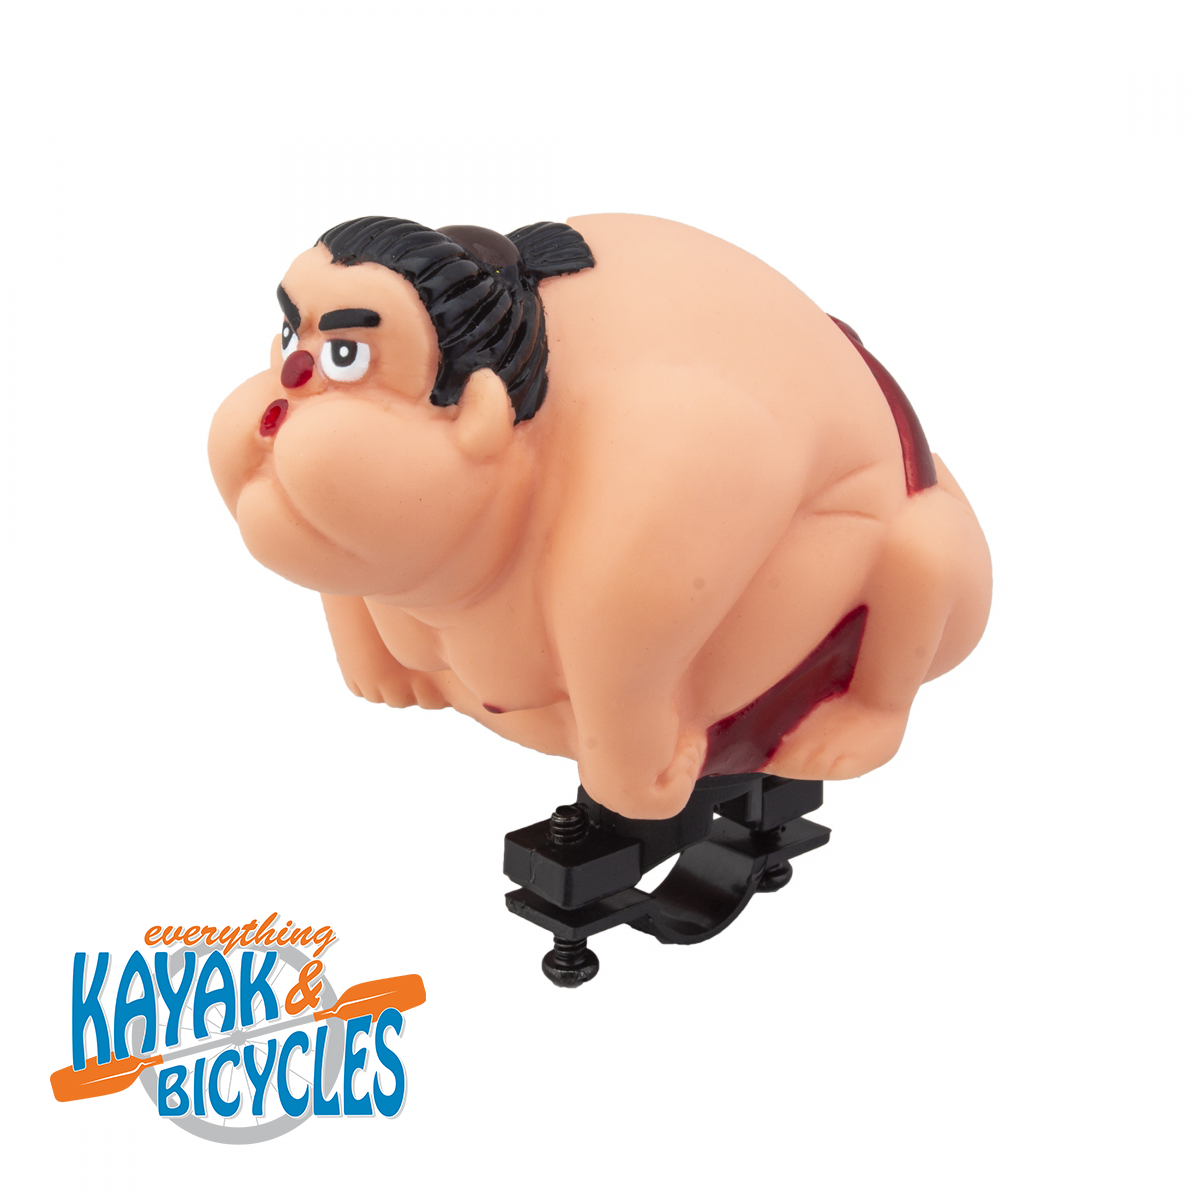 Sumo Bike Horn 
Novelty horns that are great for kids and adults alike
Perfect for novice riders as well as serious riders who like a little flair, personality, or humor for their group rides
Fits most handlebars